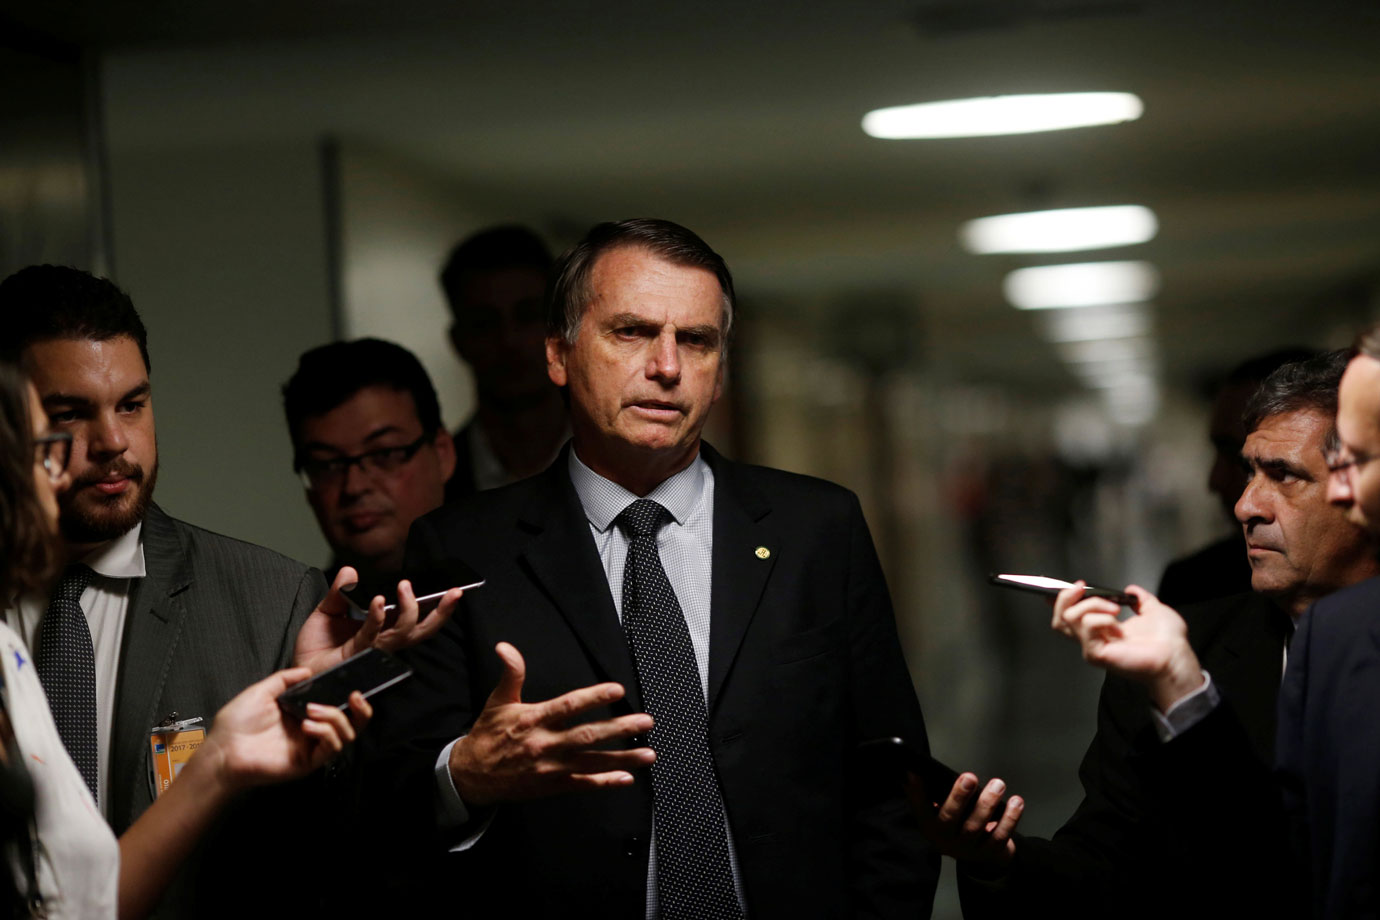 The director of the FENAJ stressed that Bolsonaro made clear, still as a candidate, his opposition to the role of the media in overseeing the powers of democracy in his speeches in support of the military dictatorship and of violence as a method of government.